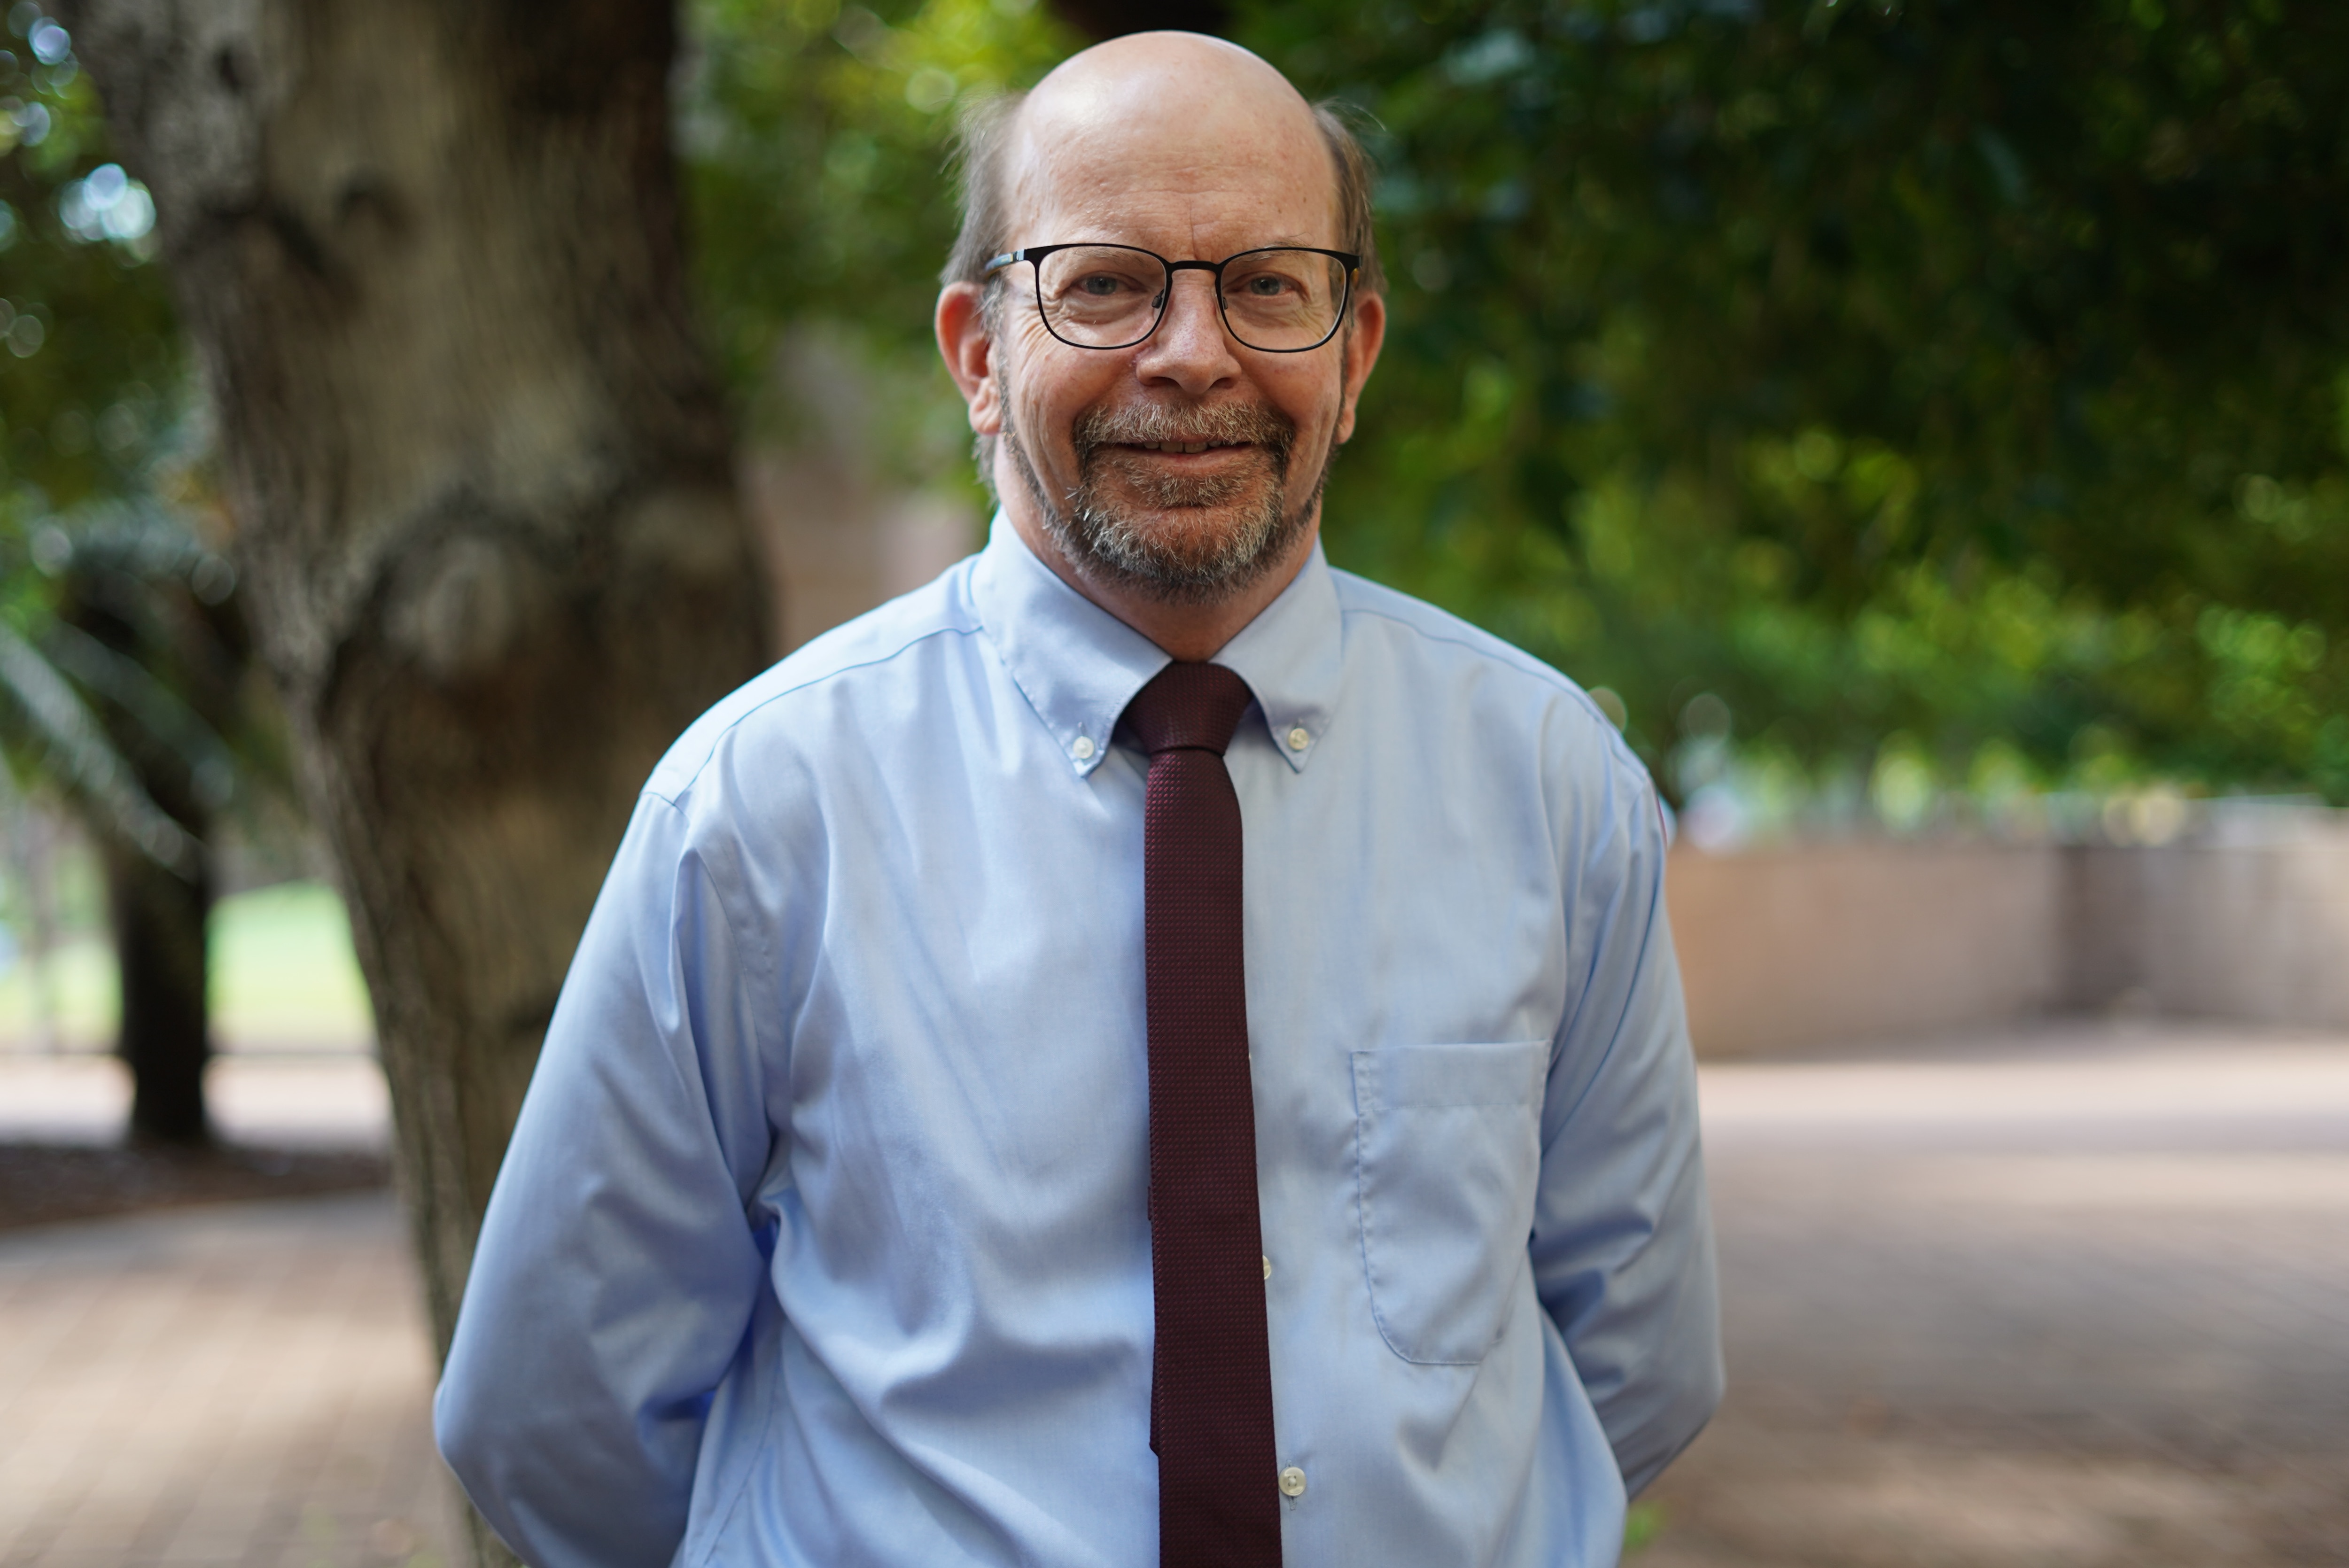 Charles Darwin University Vice Chancellor Simon Maddocks said the university is leading the nation by becoming the first to welcome back international students.  